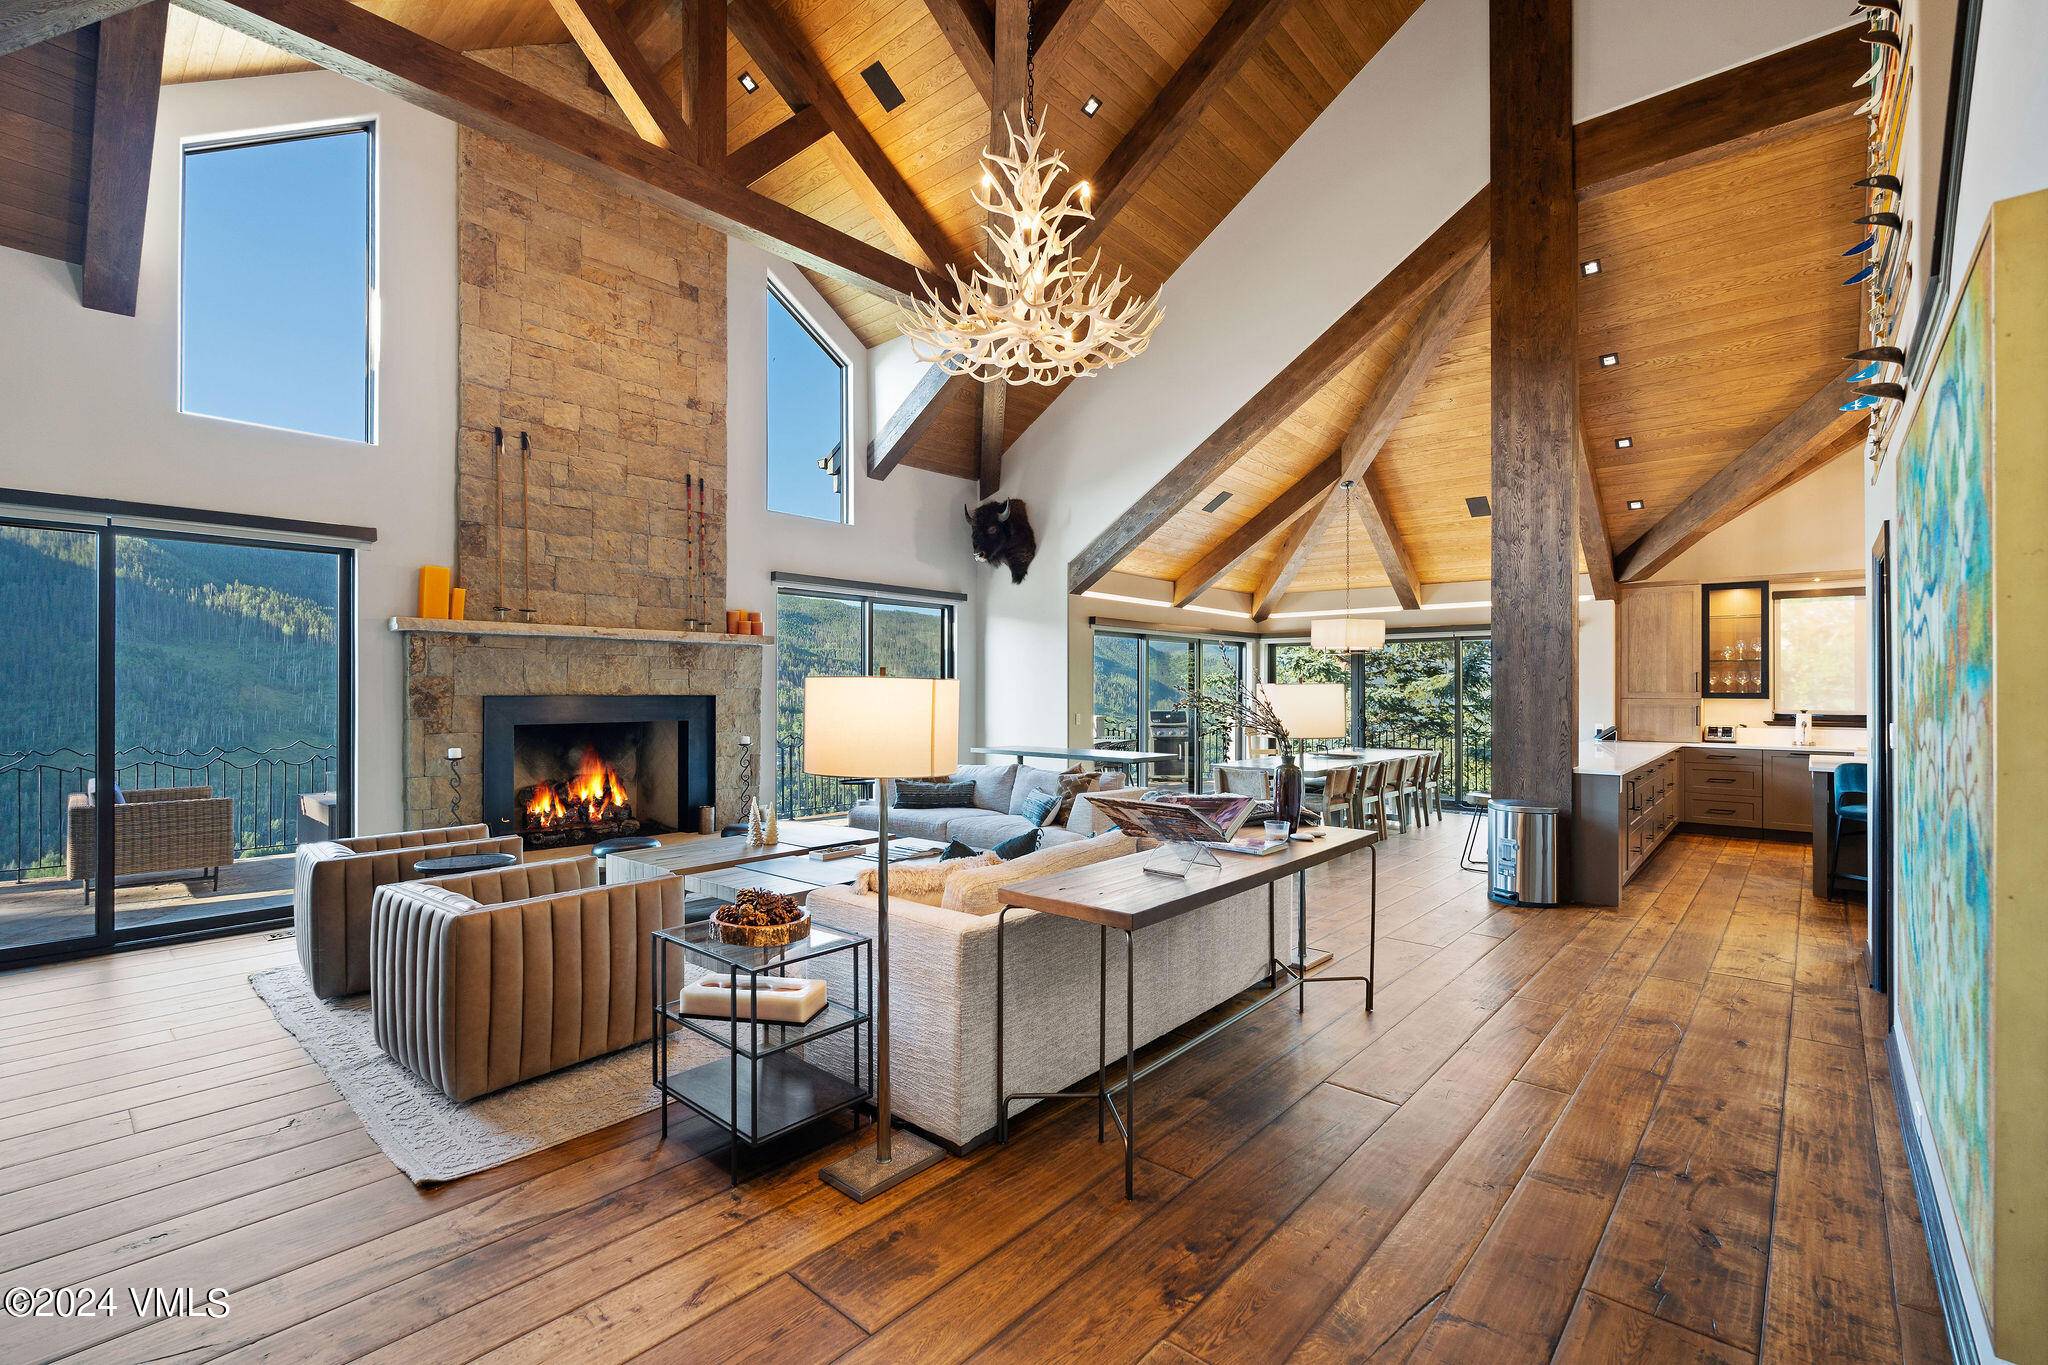 Welcome to 1675 Aspen Ridge, your luxurious retreat in the heart of Vail, Colorado.